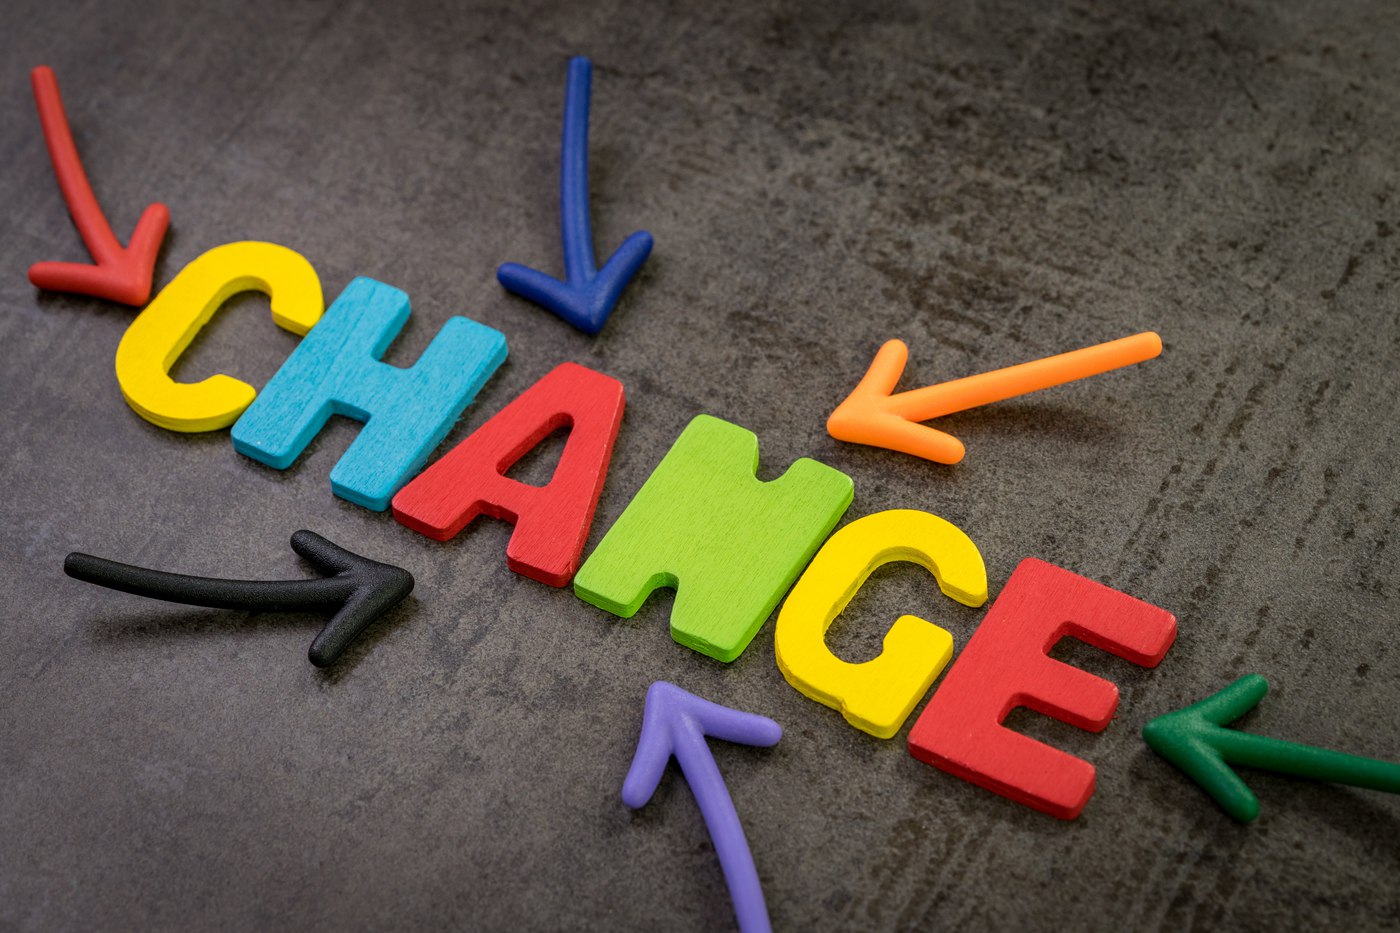 Managing The Emotions of Change